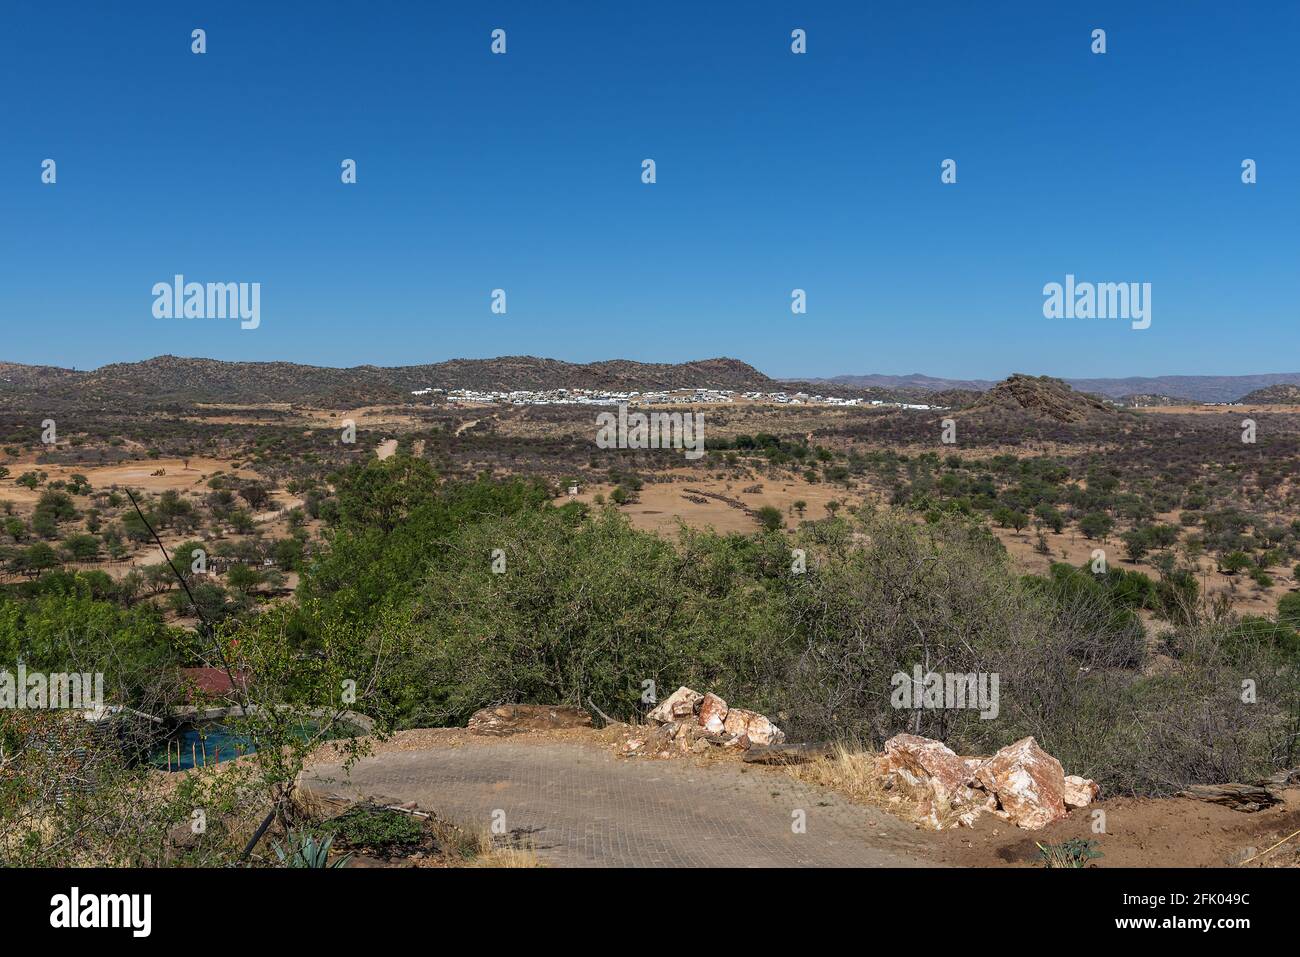 View from a mountain on the Elisenheim new district, Windhoek, Namibia Stock Photo